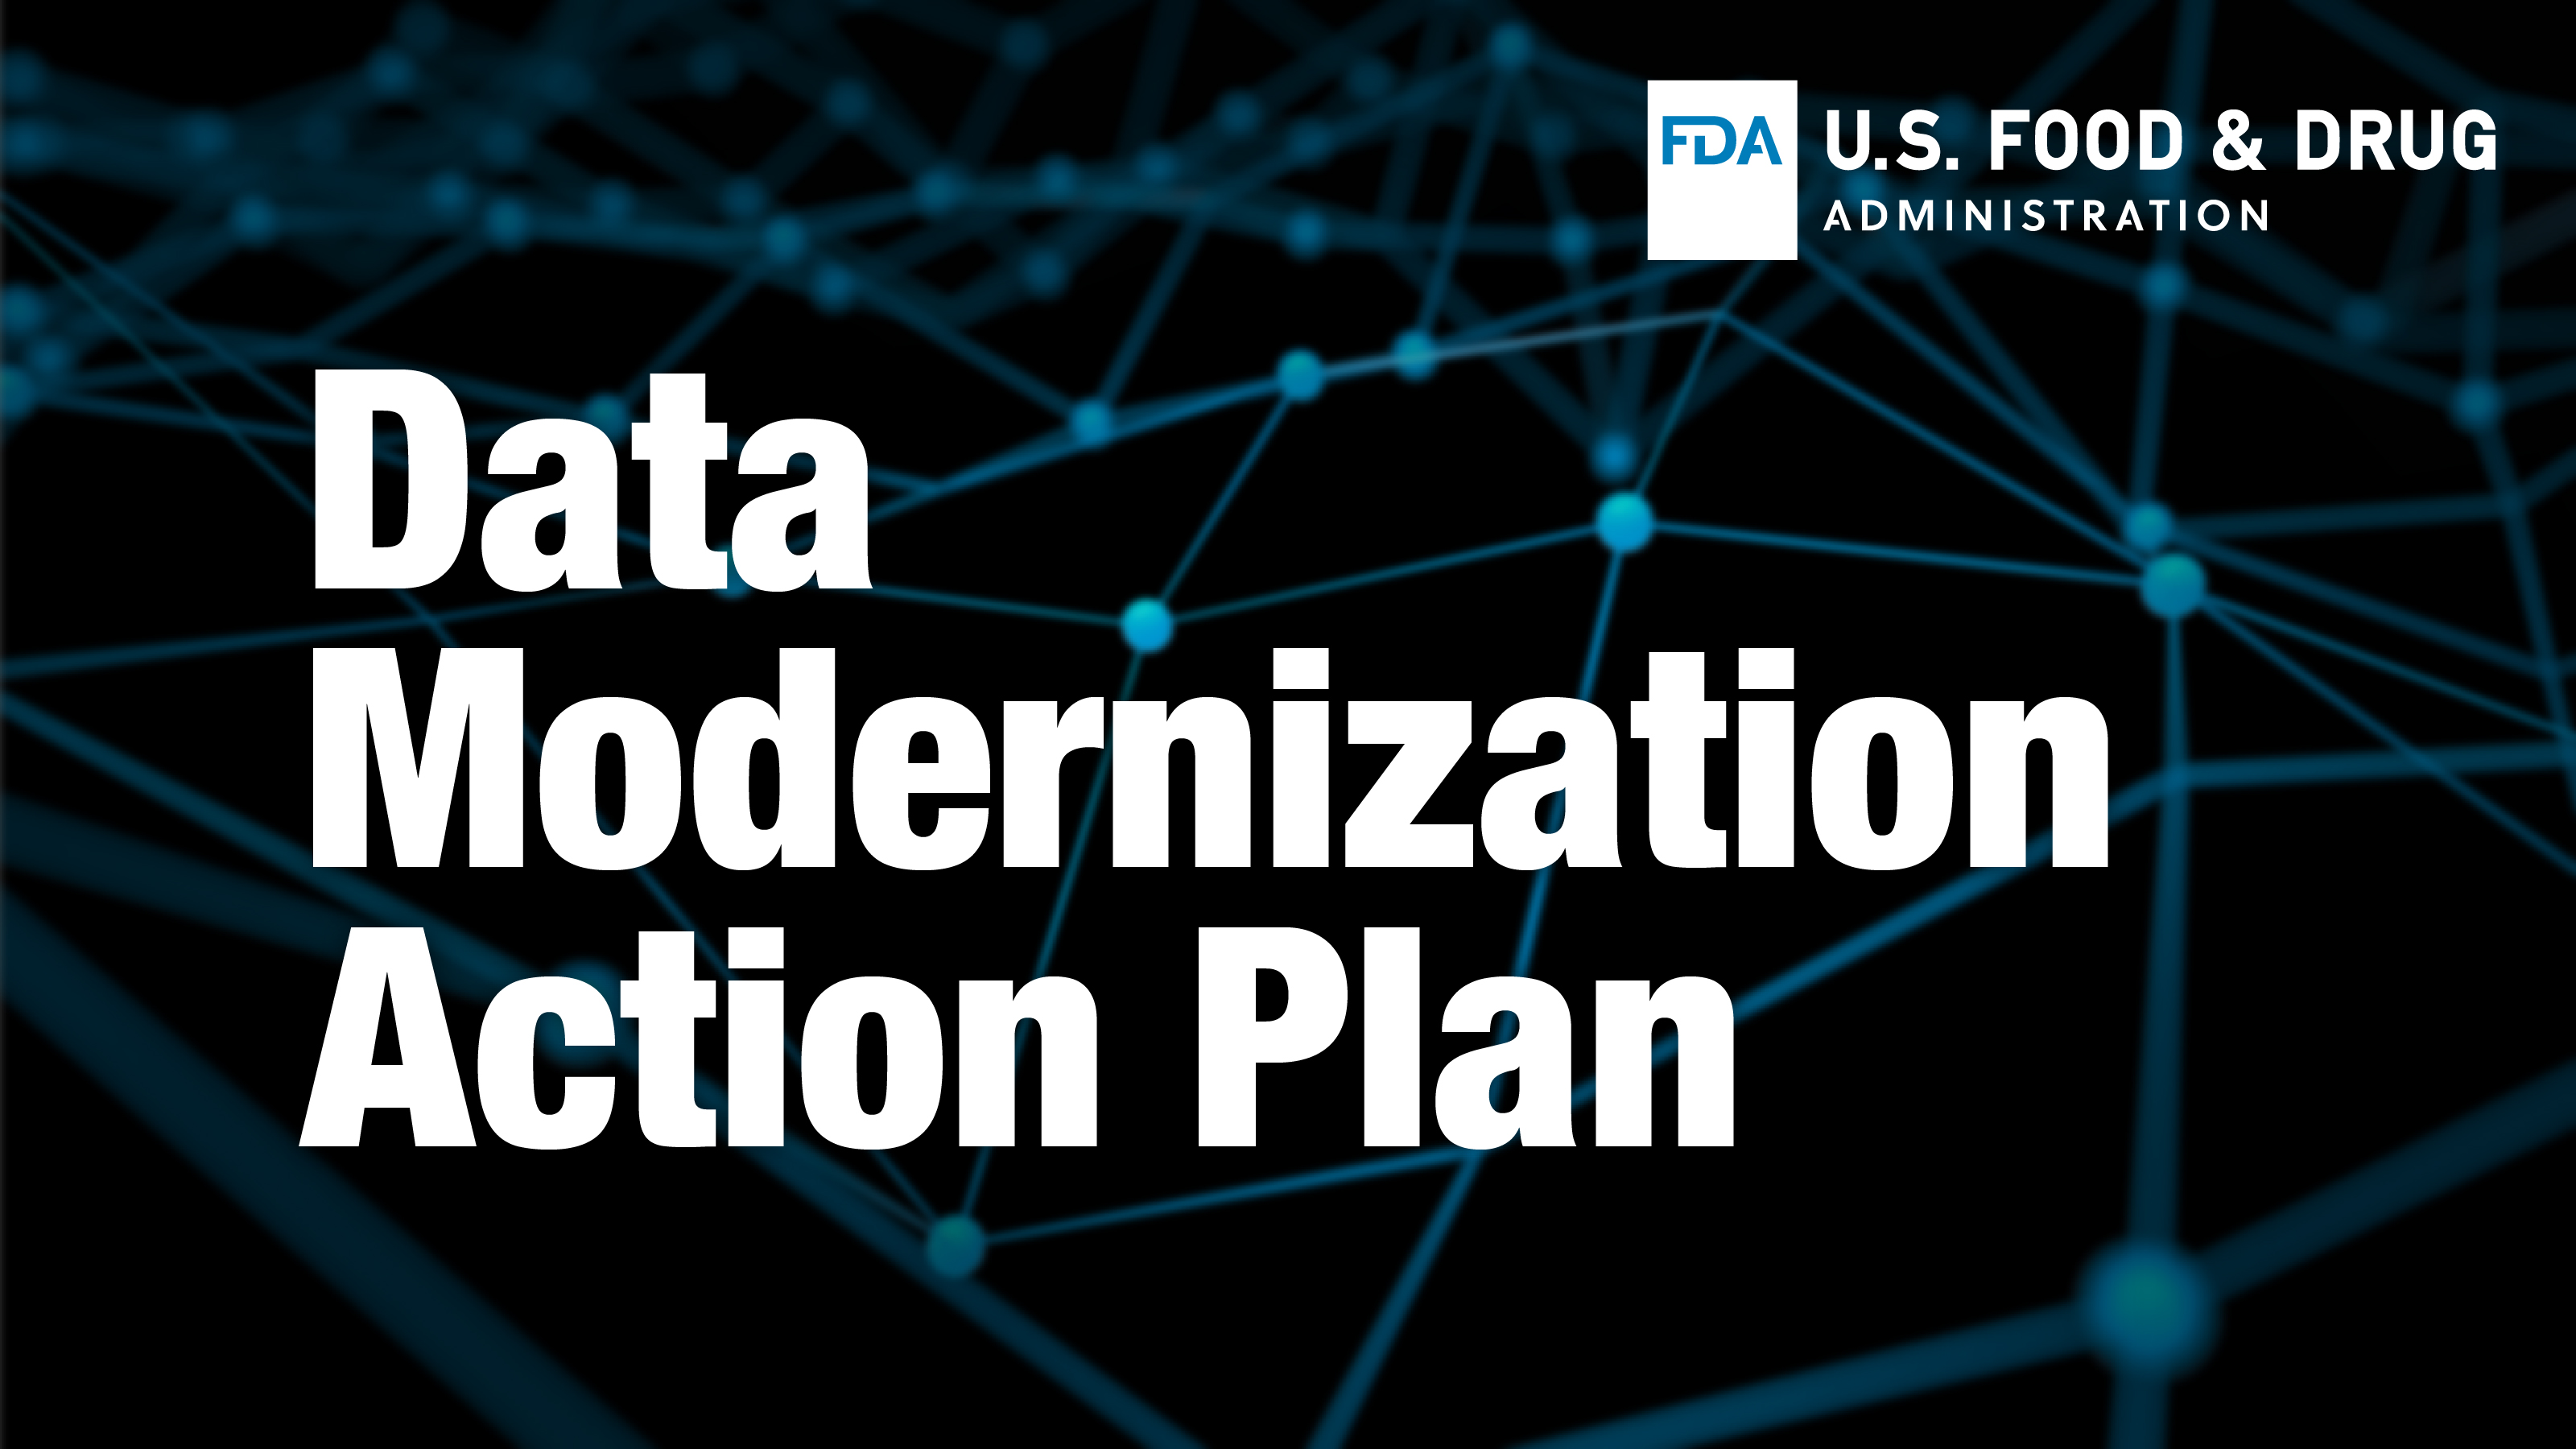 Text for Data Modernization Action Plan juxtaposed with an abstract graphic of a data network topology